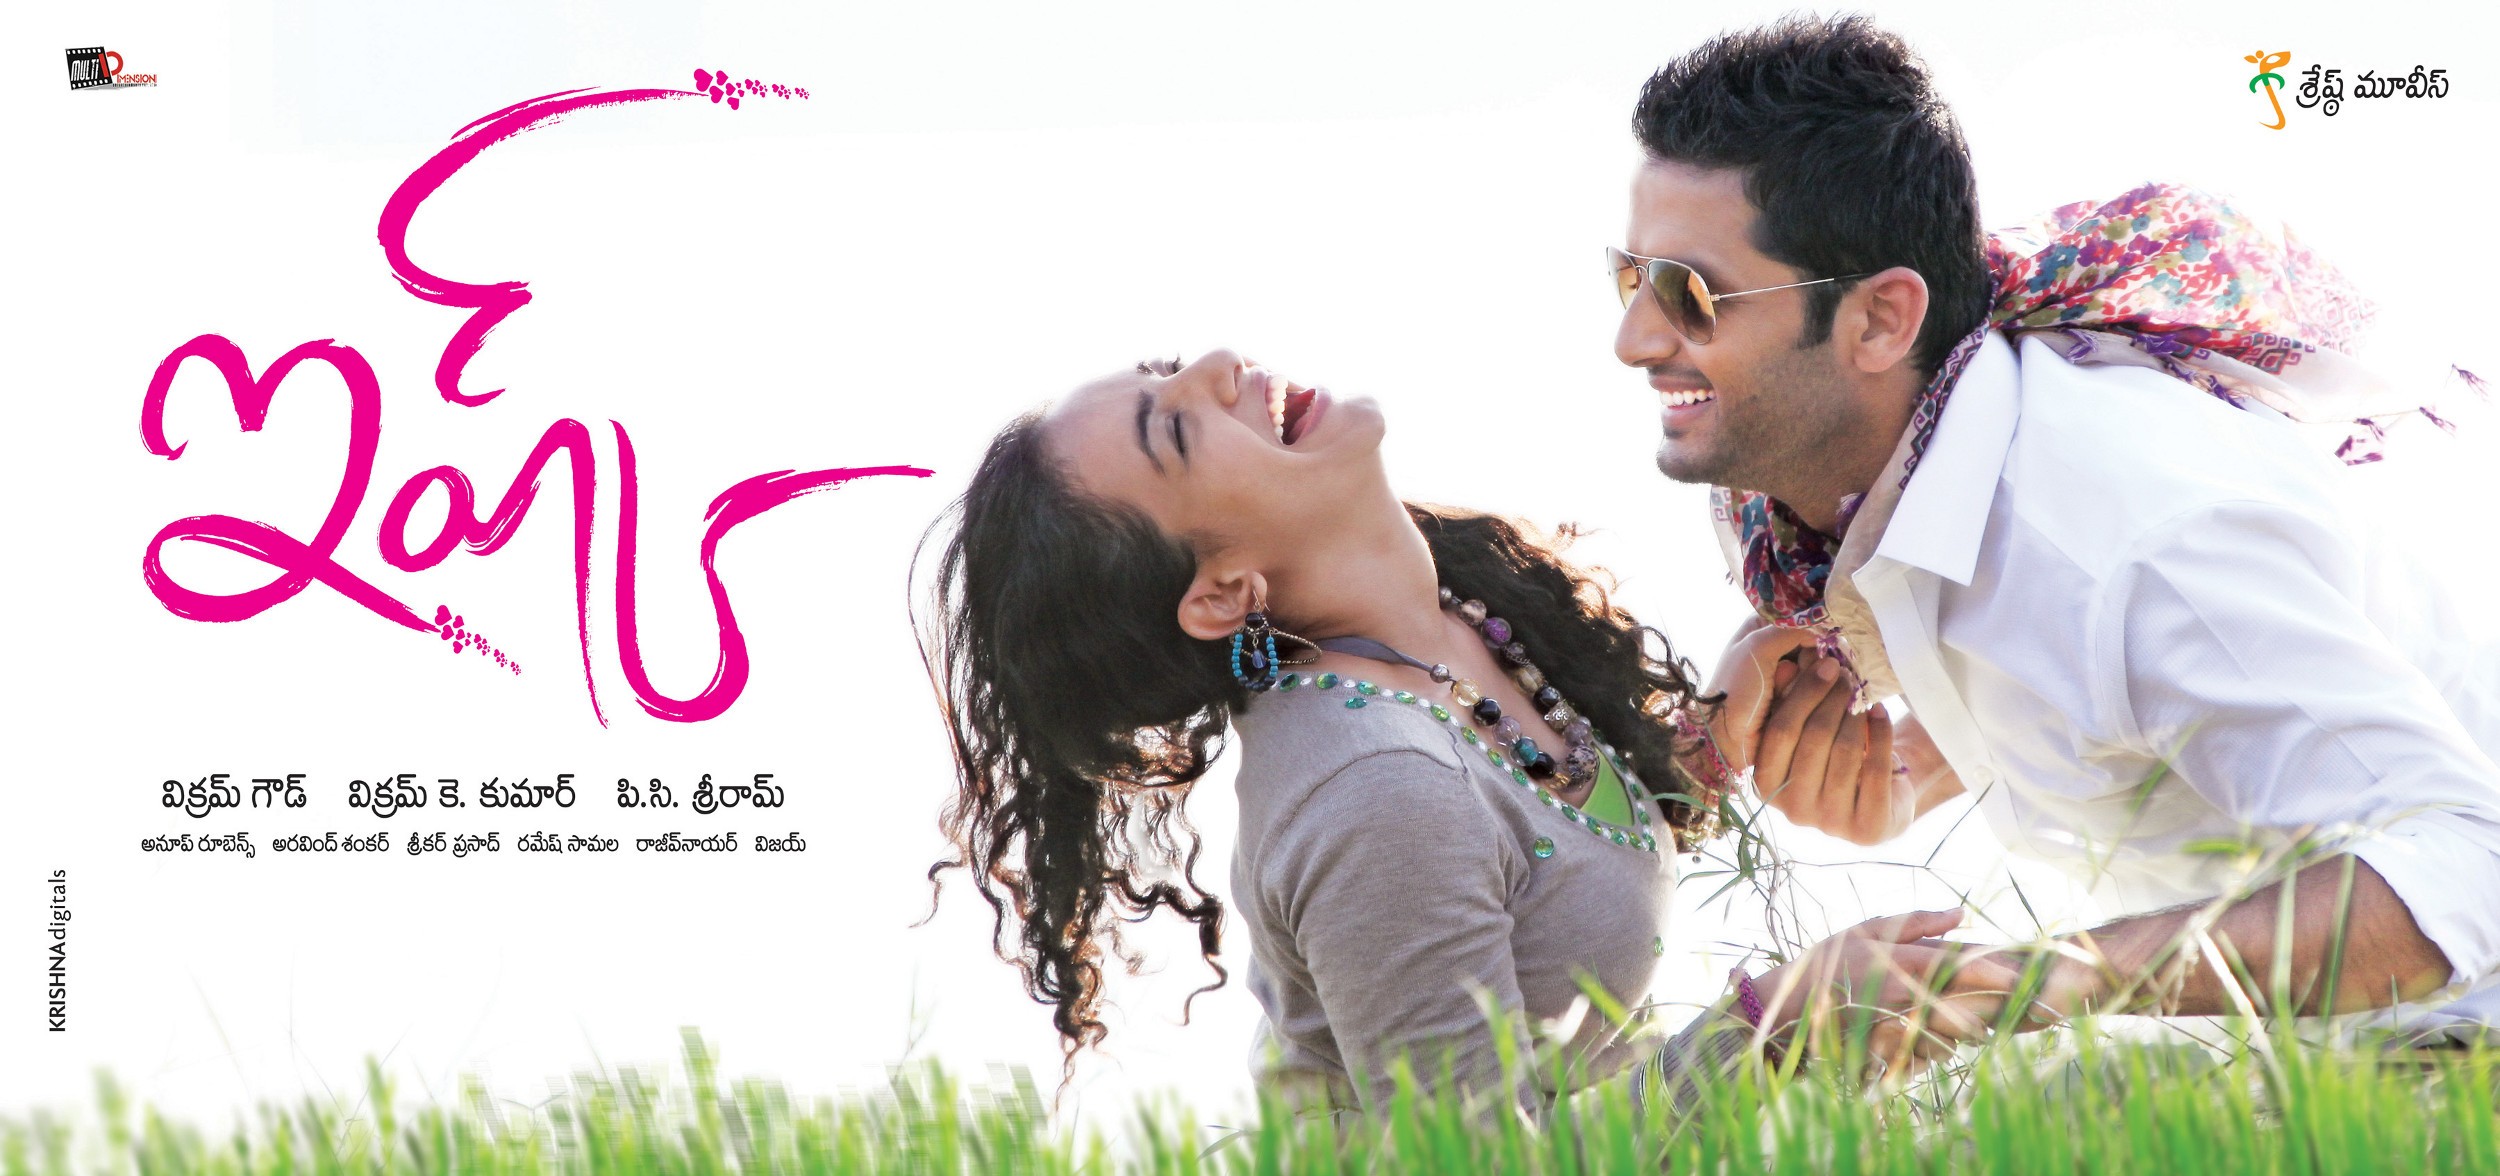 Mega Sized Movie Poster Image for Ishq (#7 of 13)